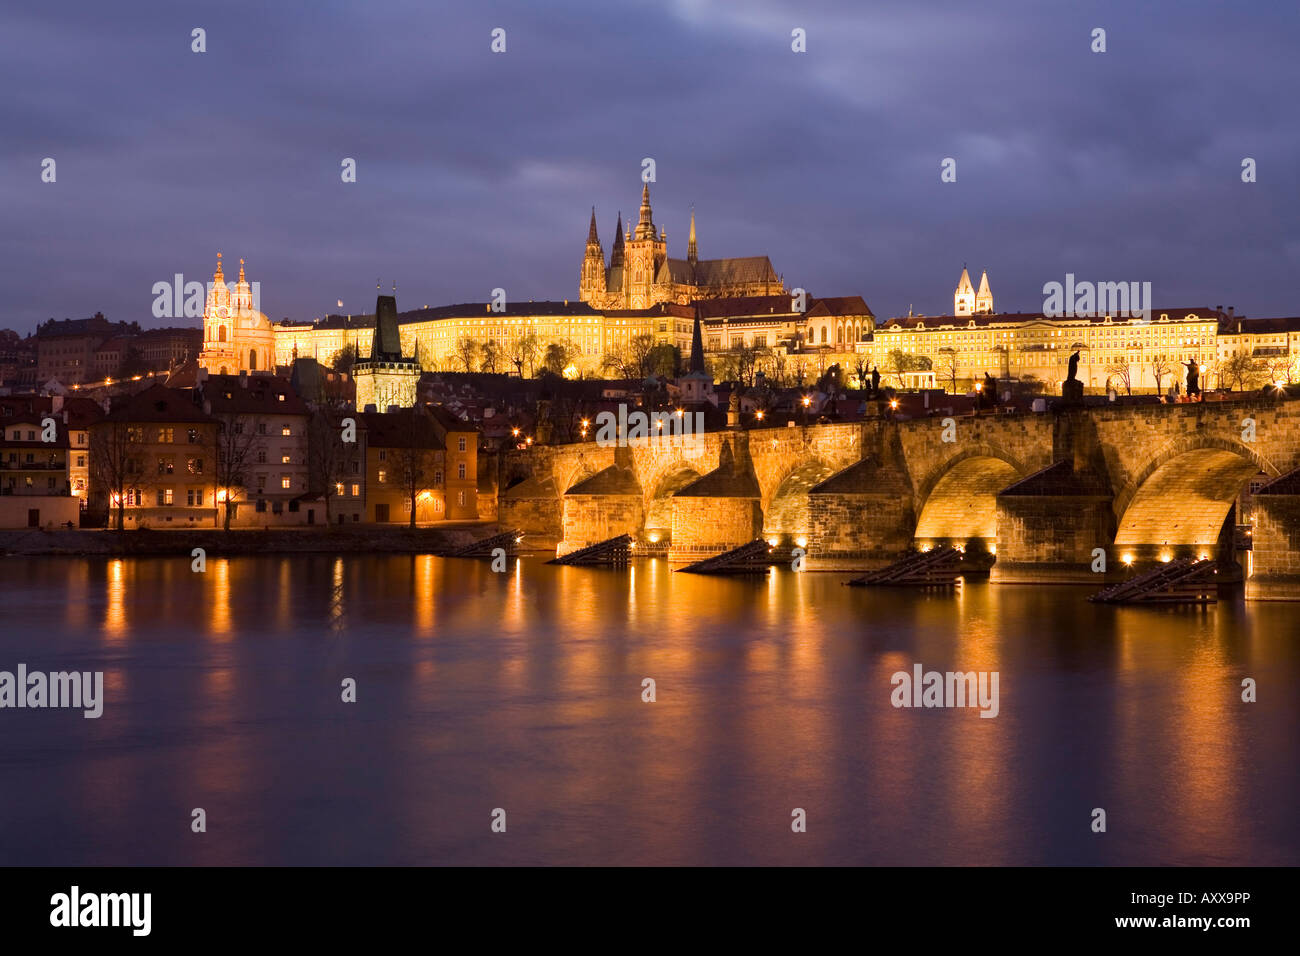 St. Vitus Cathedral, Charles Bridge and the Castle District illuminated at night in winter, Prague, Czech Republic Stock Photo